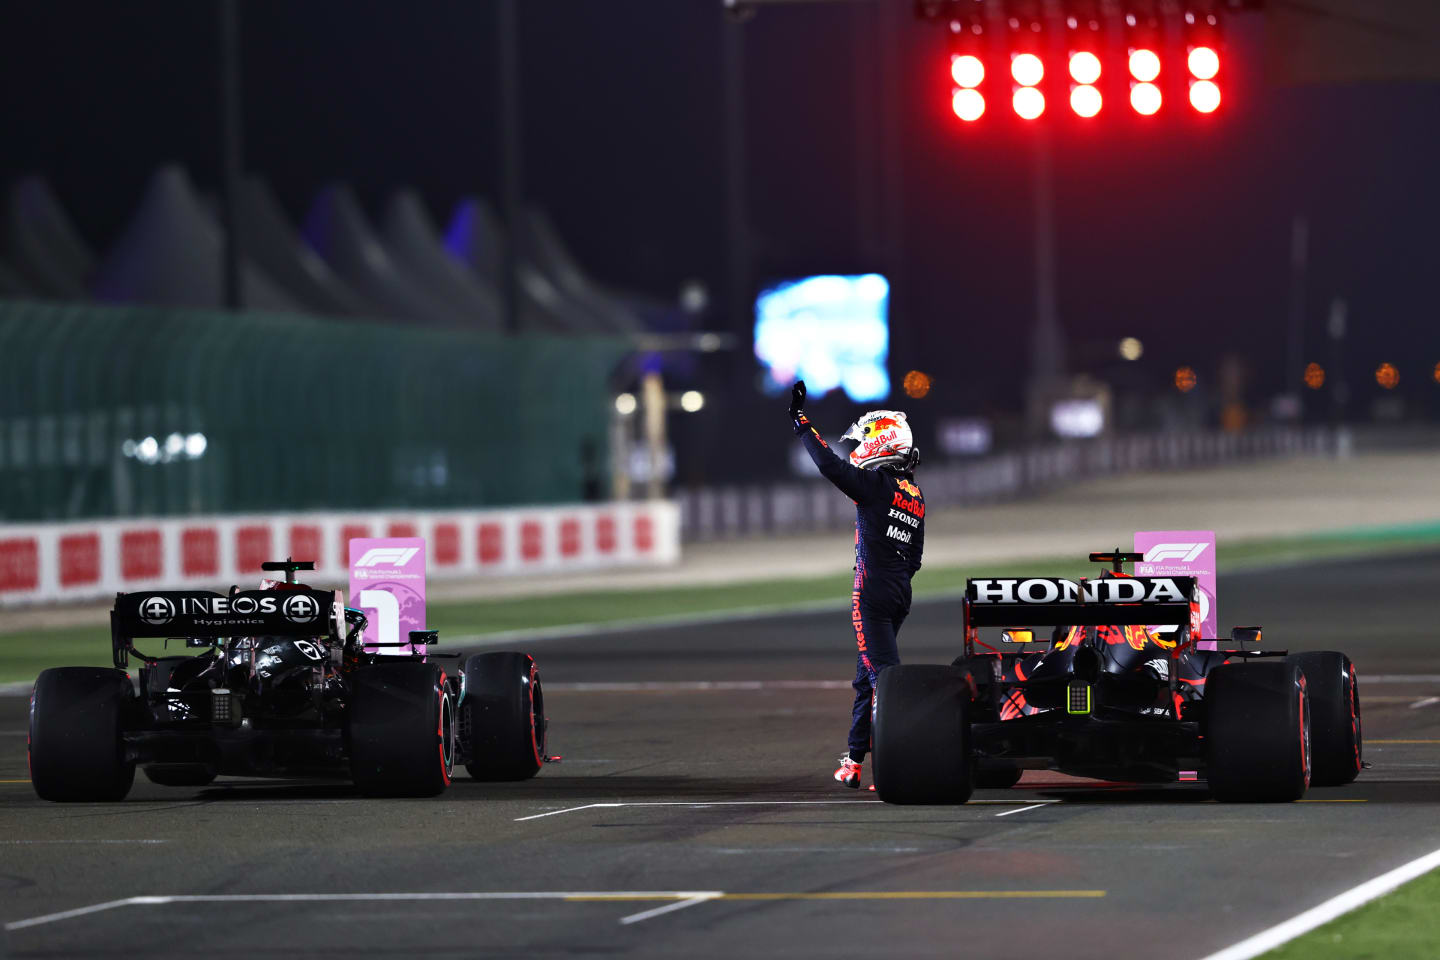 DOHA, QATAR - NOVEMBER 20: Second place qualifier Max Verstappen of Netherlands and Red Bull Racing celebrates in parc ferme during qualifying ahead of the F1 Grand Prix of Qatar at Losail International Circuit on November 20, 2021 in Doha, Qatar. (Photo by Mark Thompson/Getty Images)